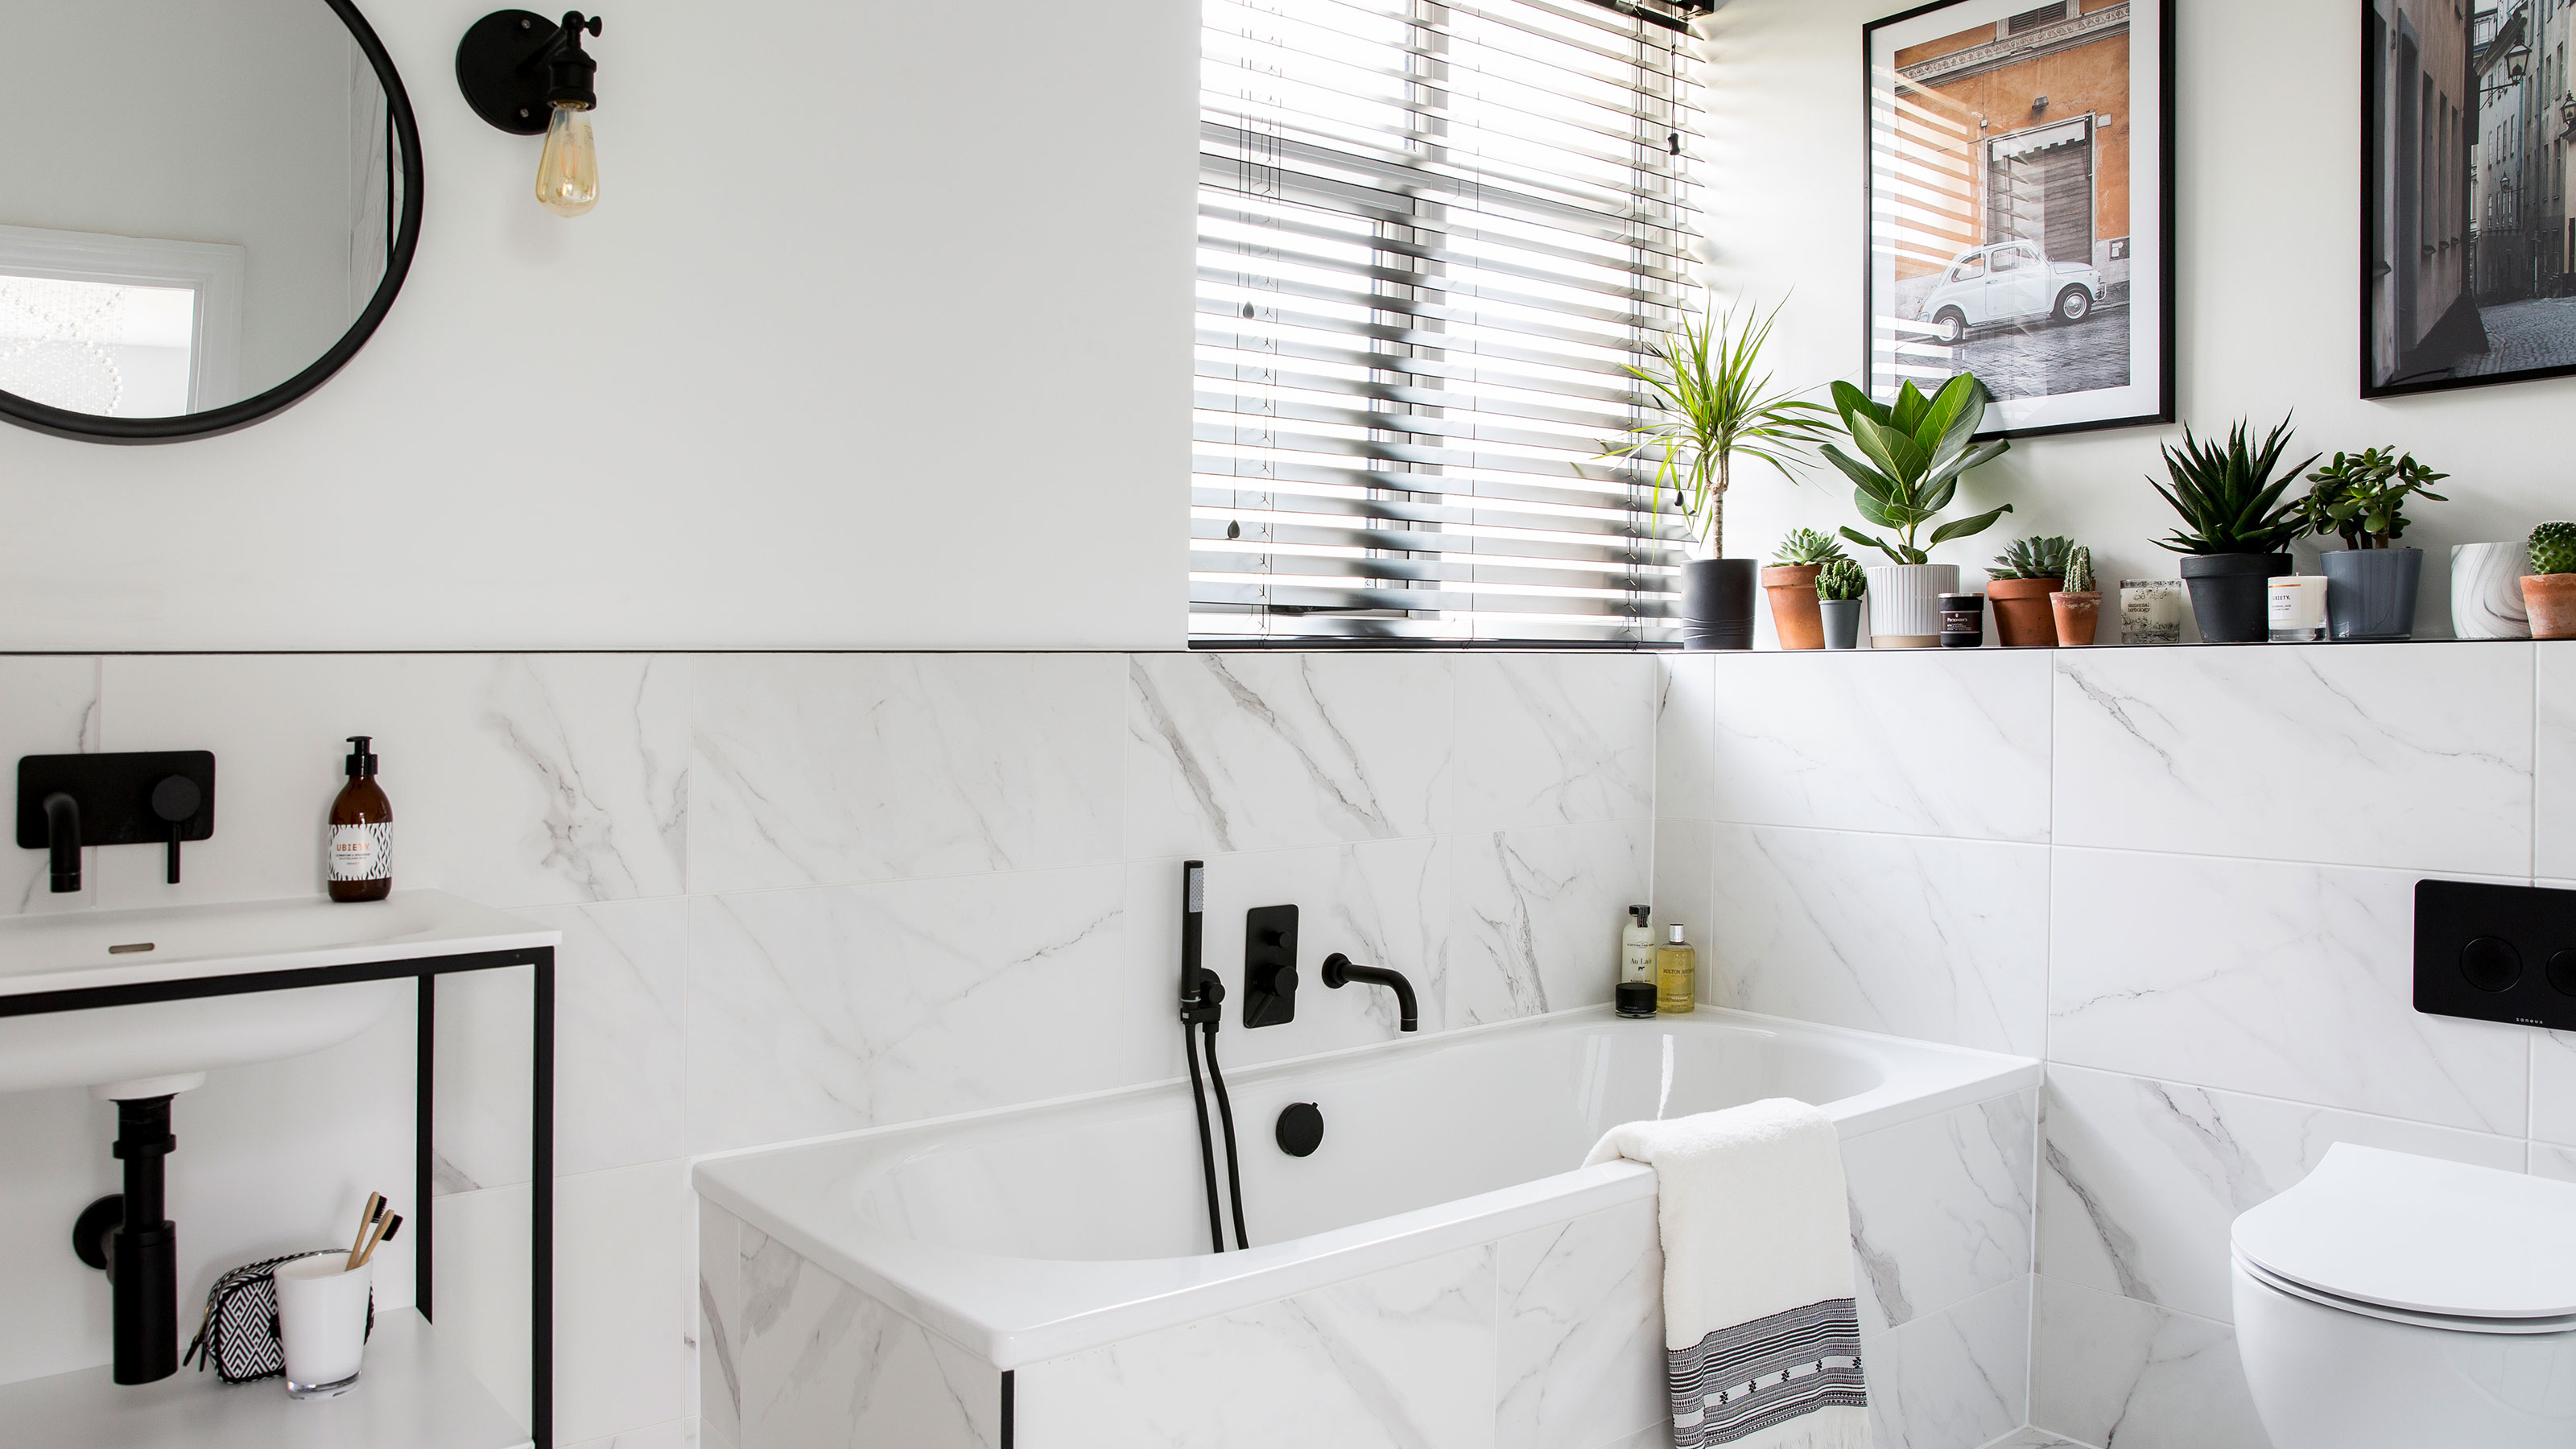 Small Bathroom Remodel: Clever Bathroom Ideas on a Budget